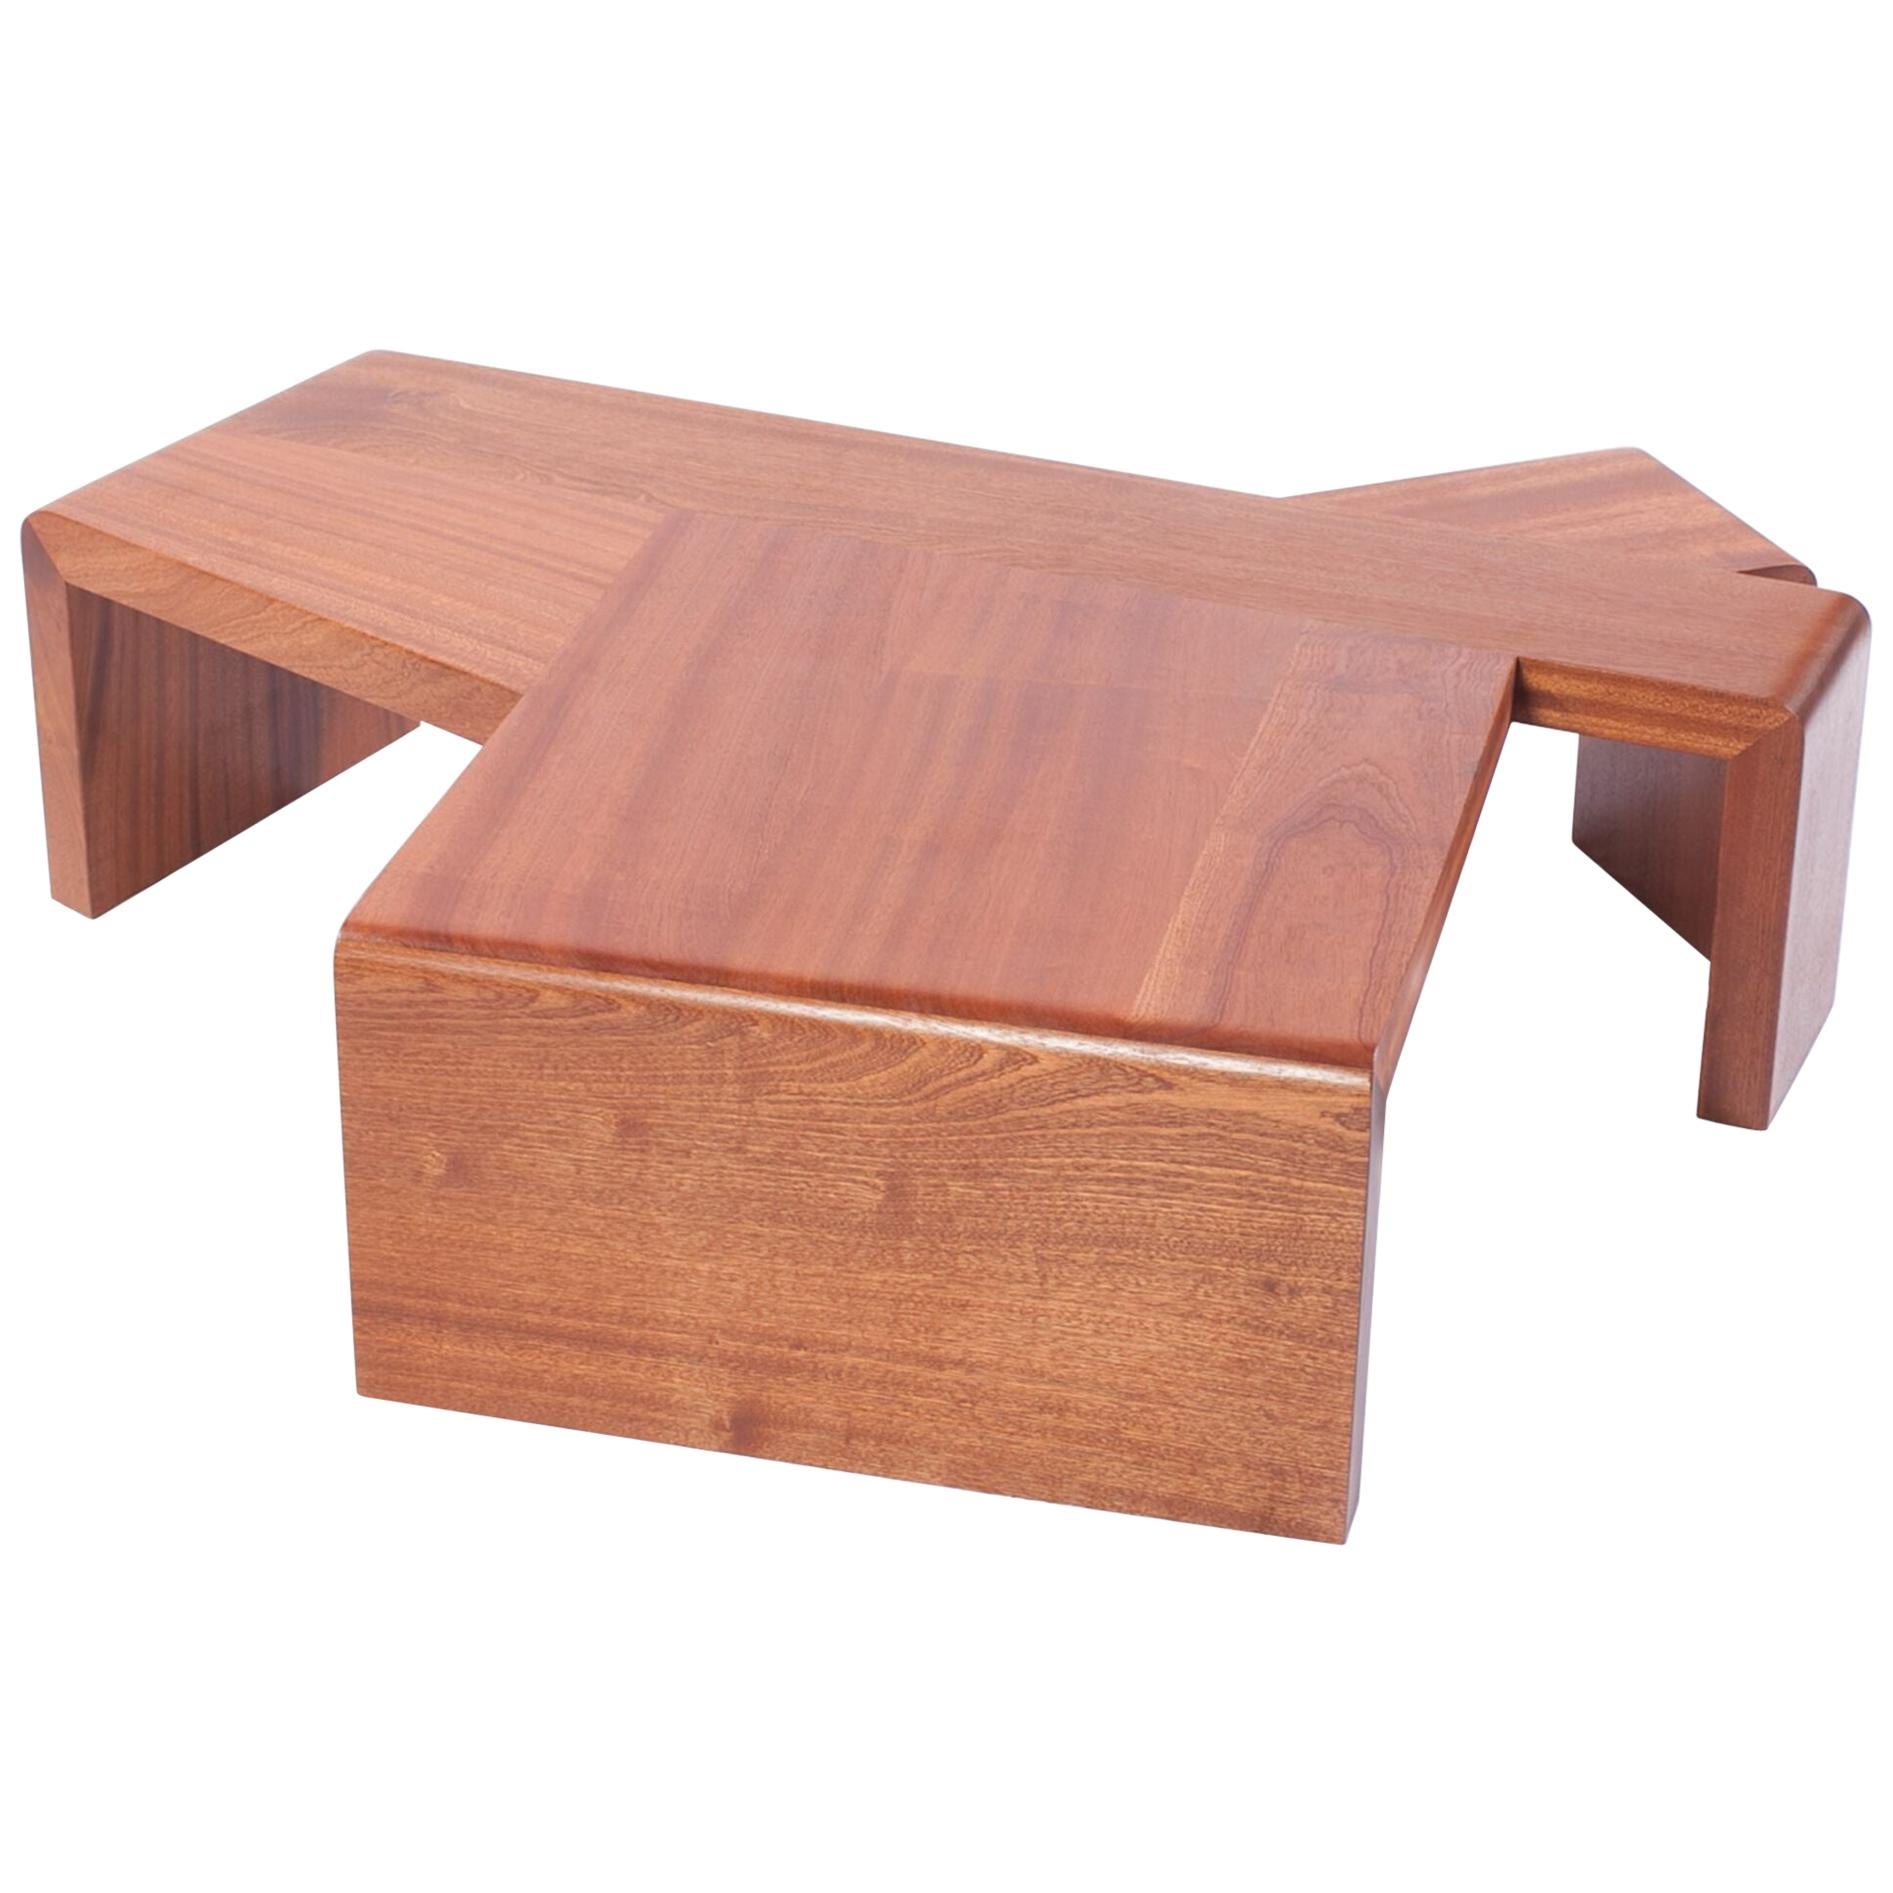 MAHOGANY Glyph Side or Coffee Table in solid mahogany by Taidgh O'Neill